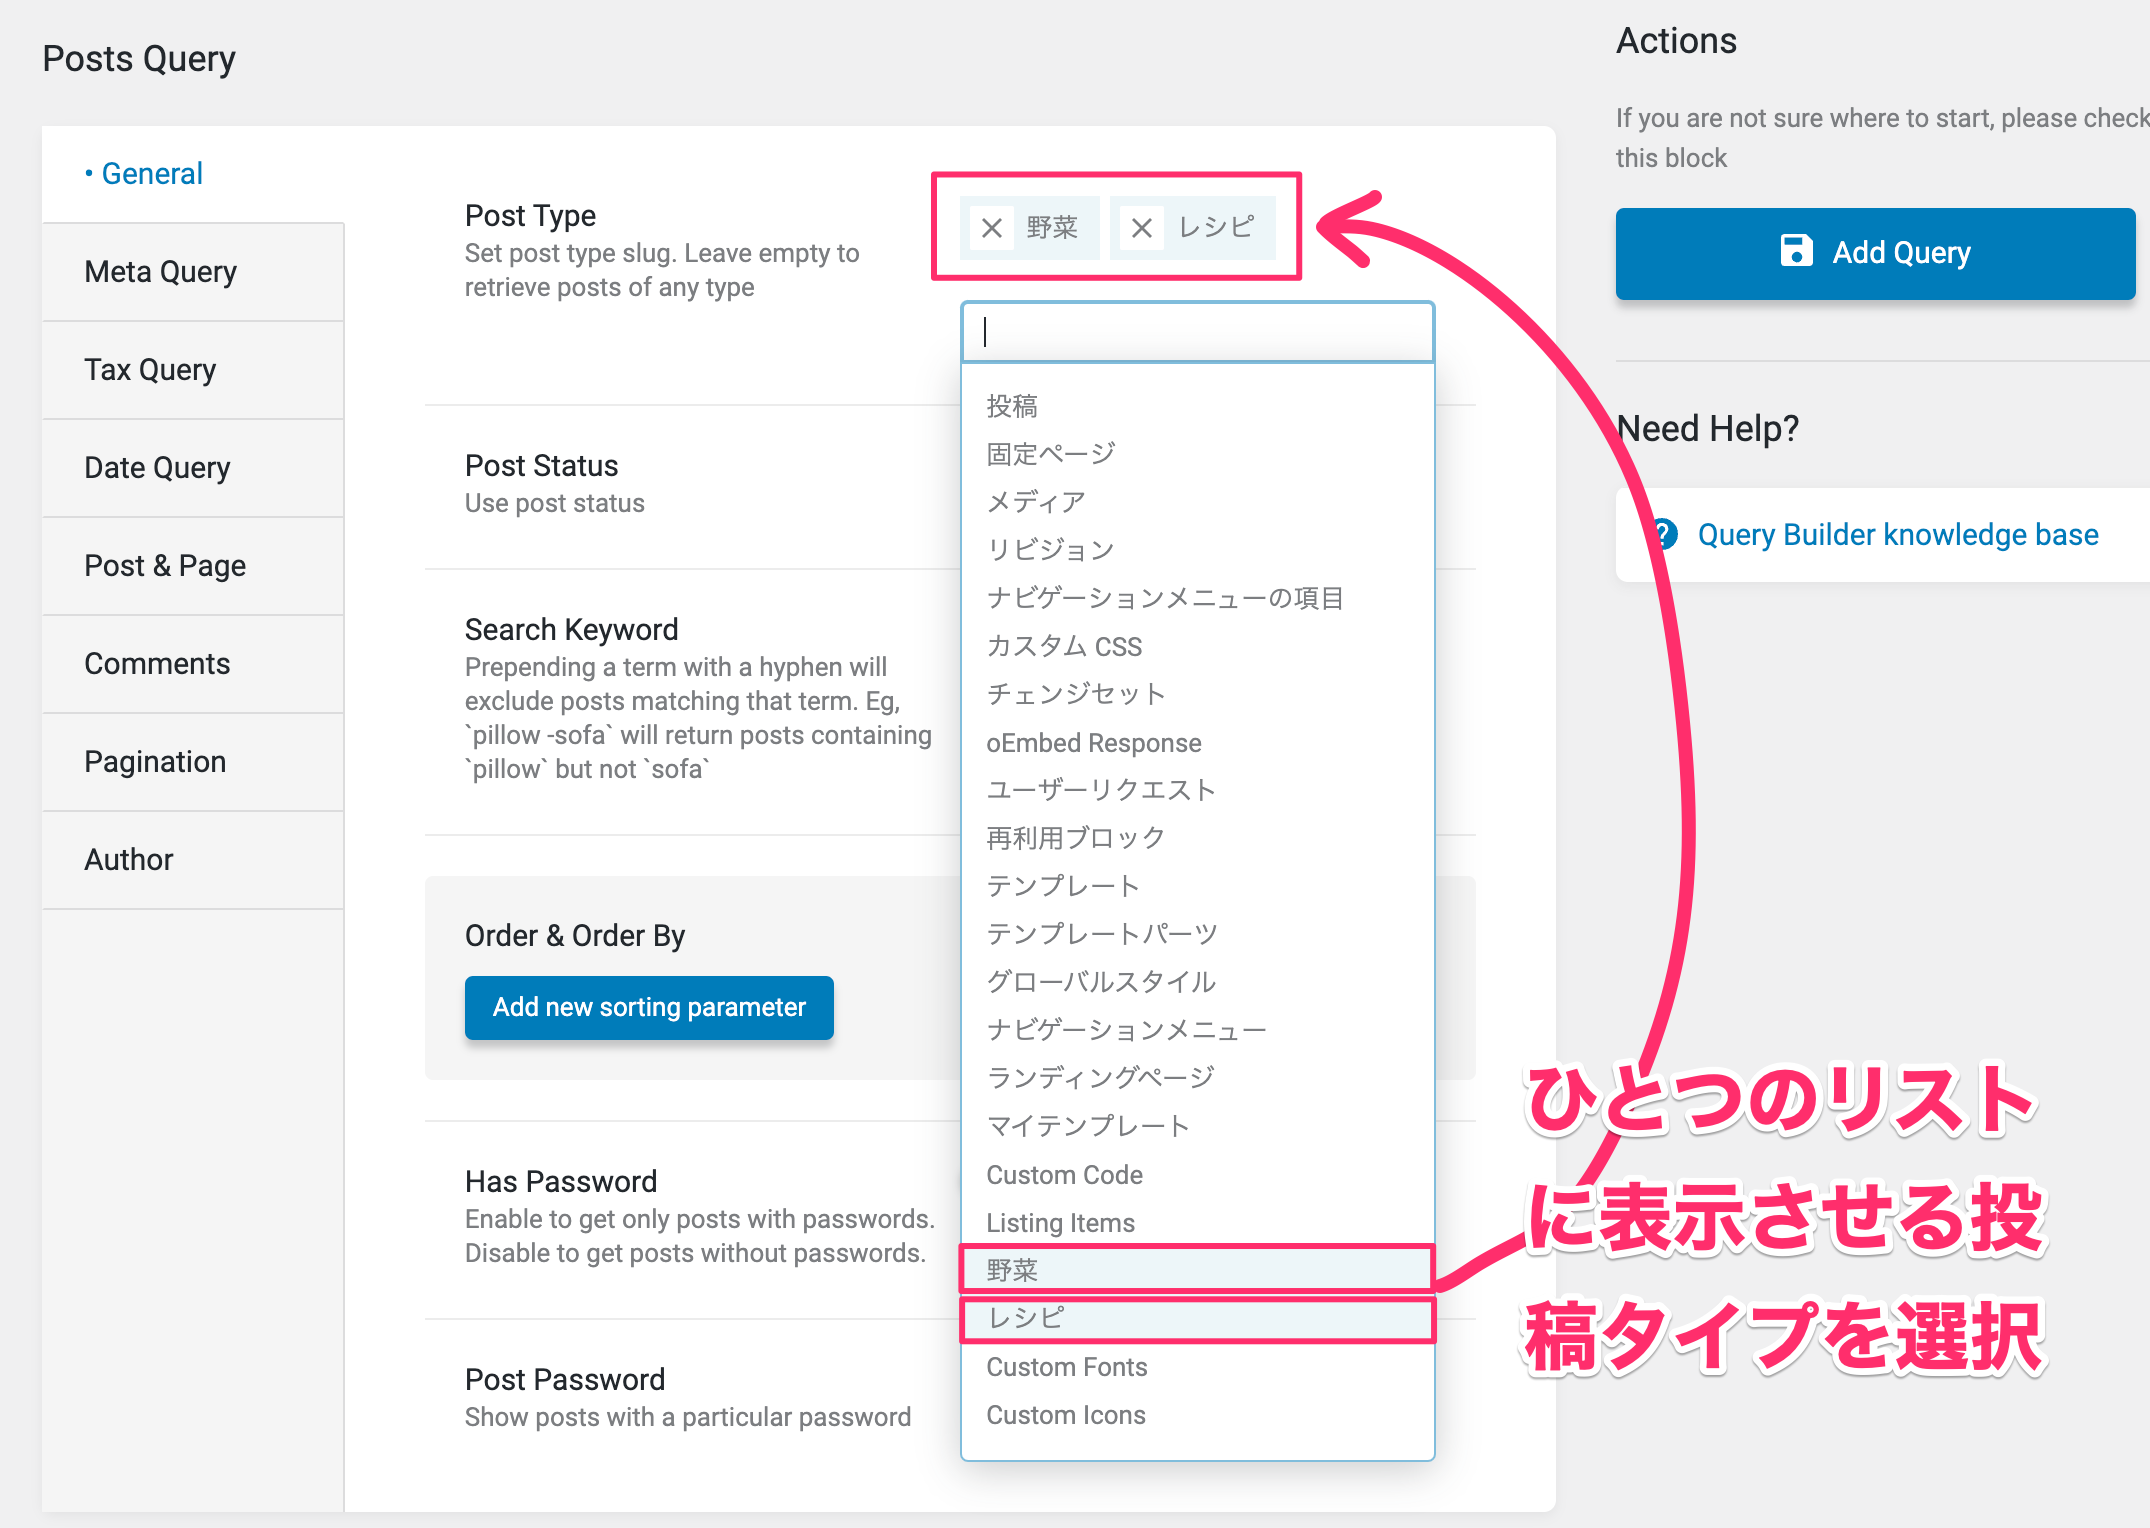 Posts Queryの『Post Type』でリストに表示させる投稿タイプを複数選択